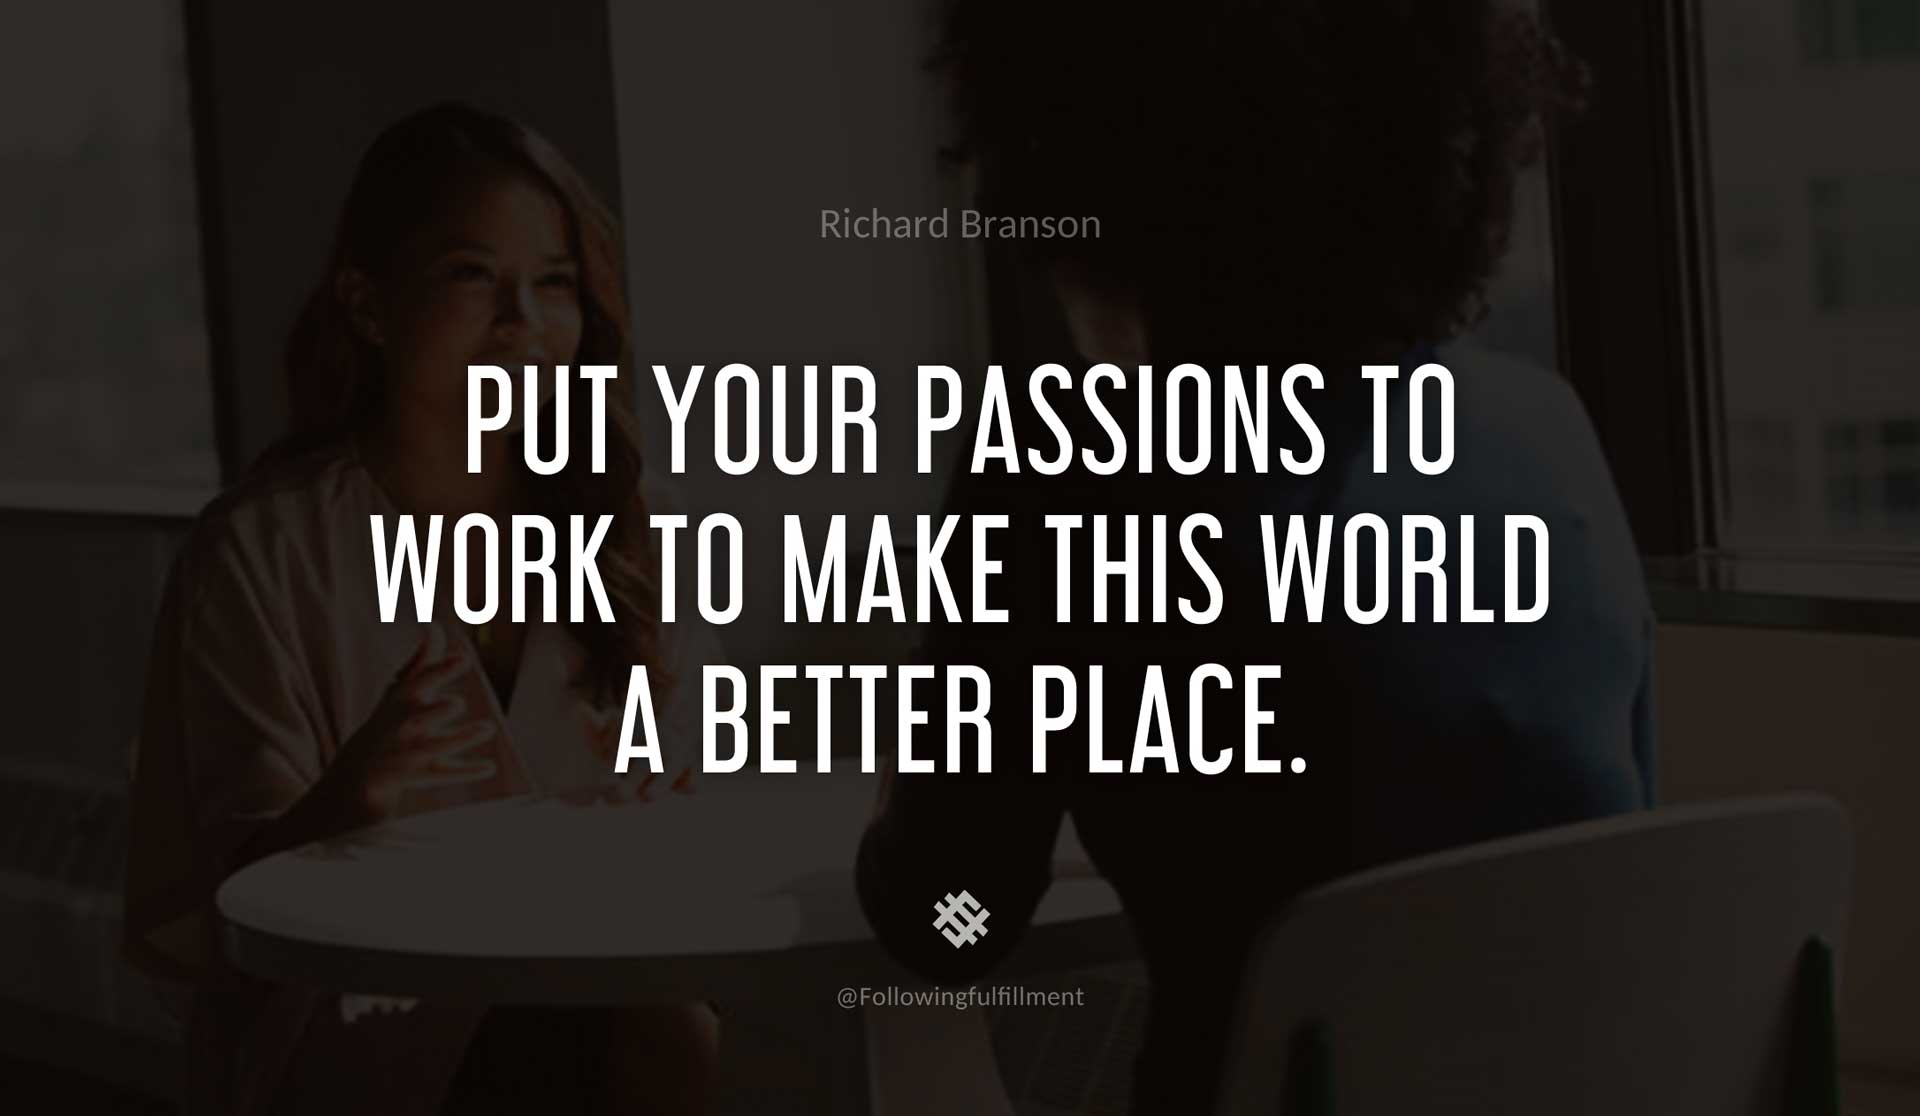 Put-your-passions-to-work-to-make-this-world-a-better-place.-RICHARD-BRANSON-Quote.jpg